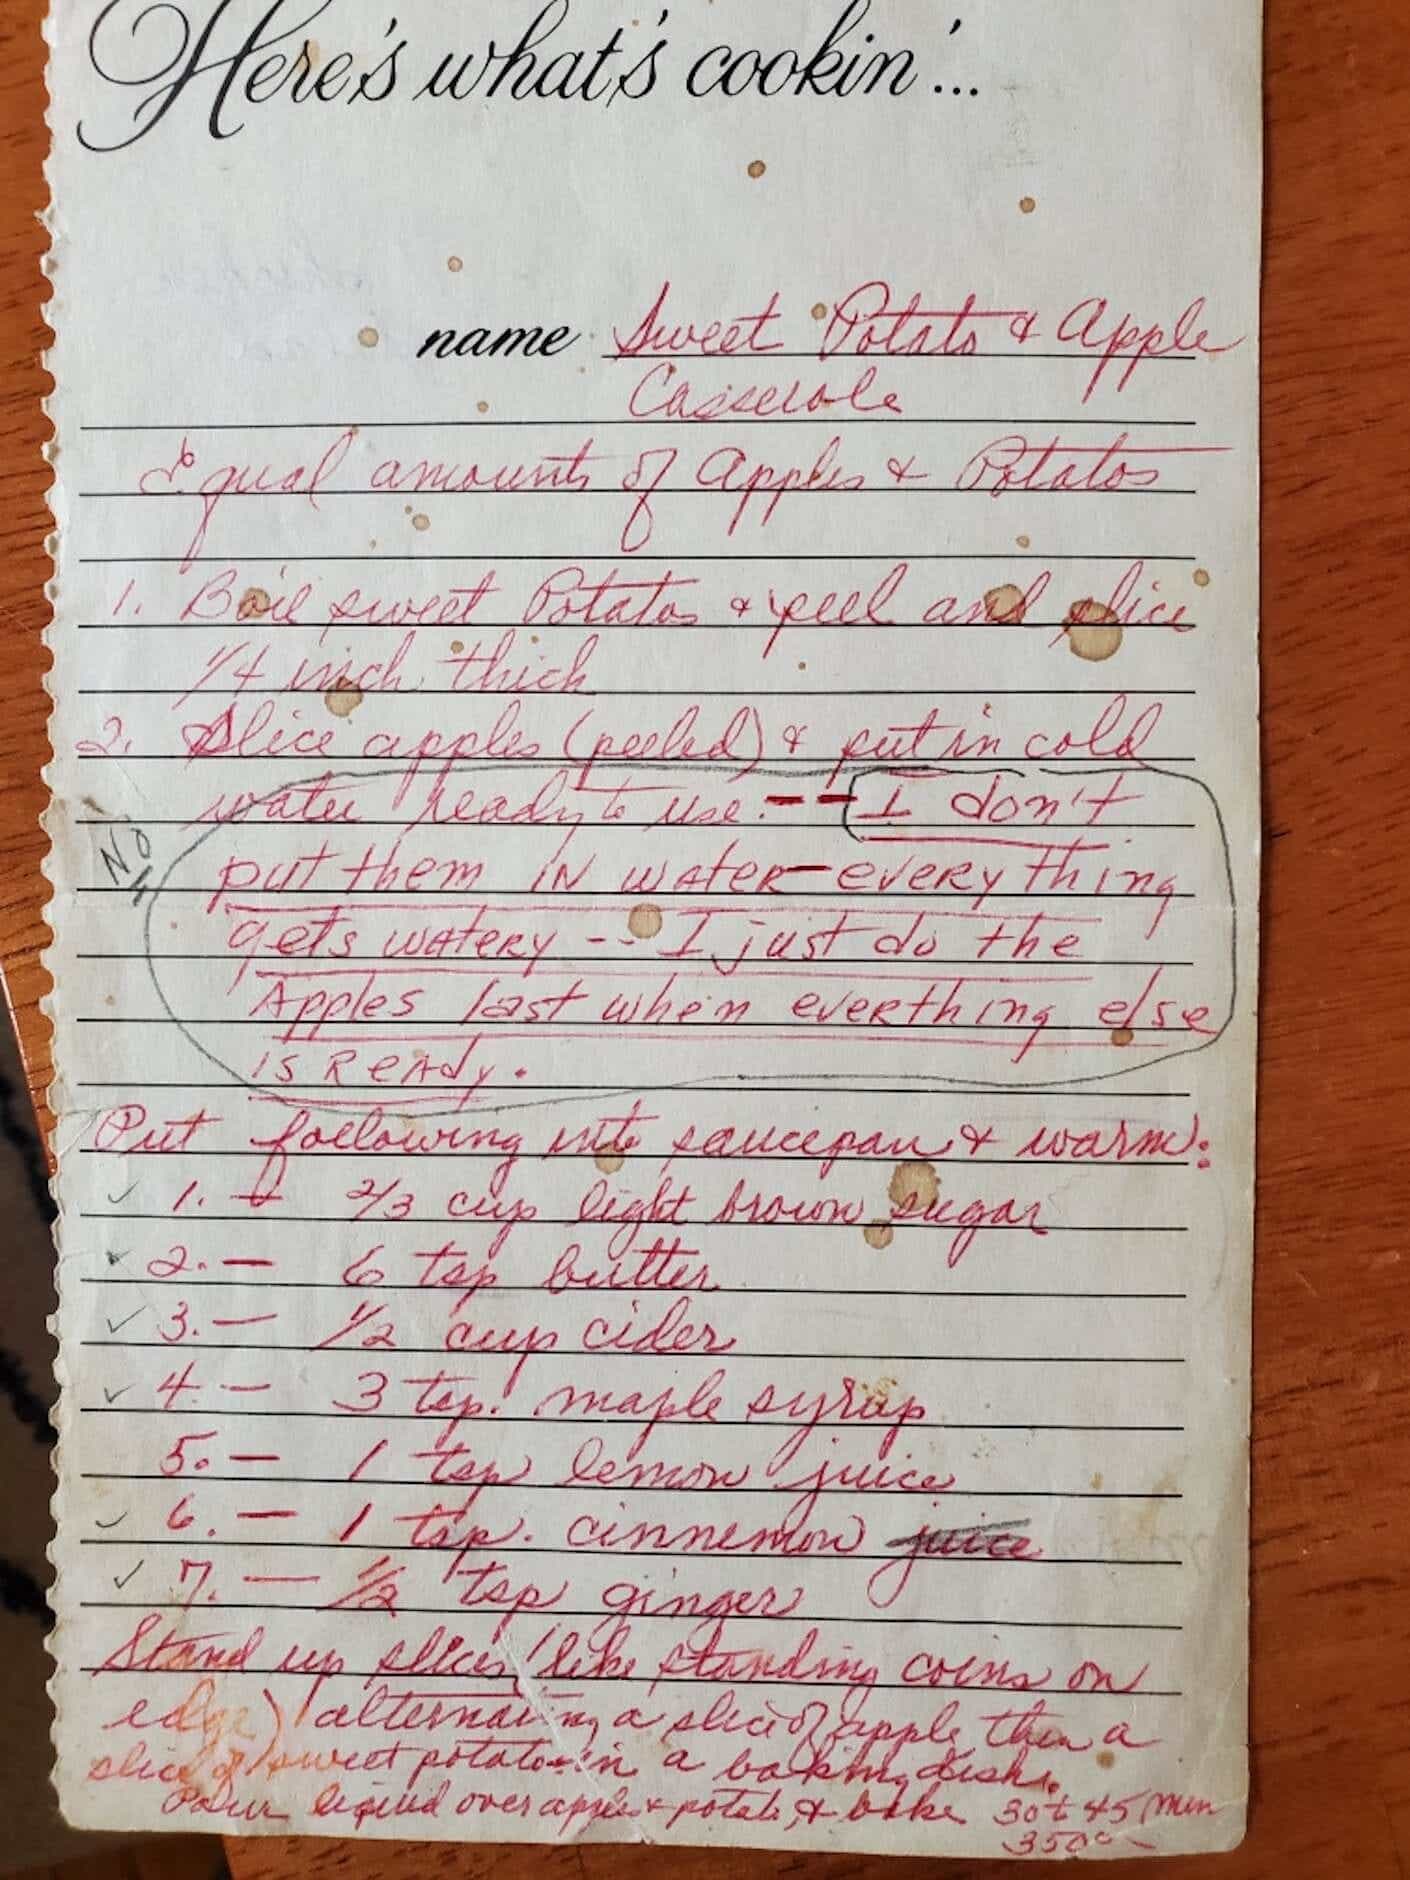 A handwritten recipe on an old piece of yellowed paper.